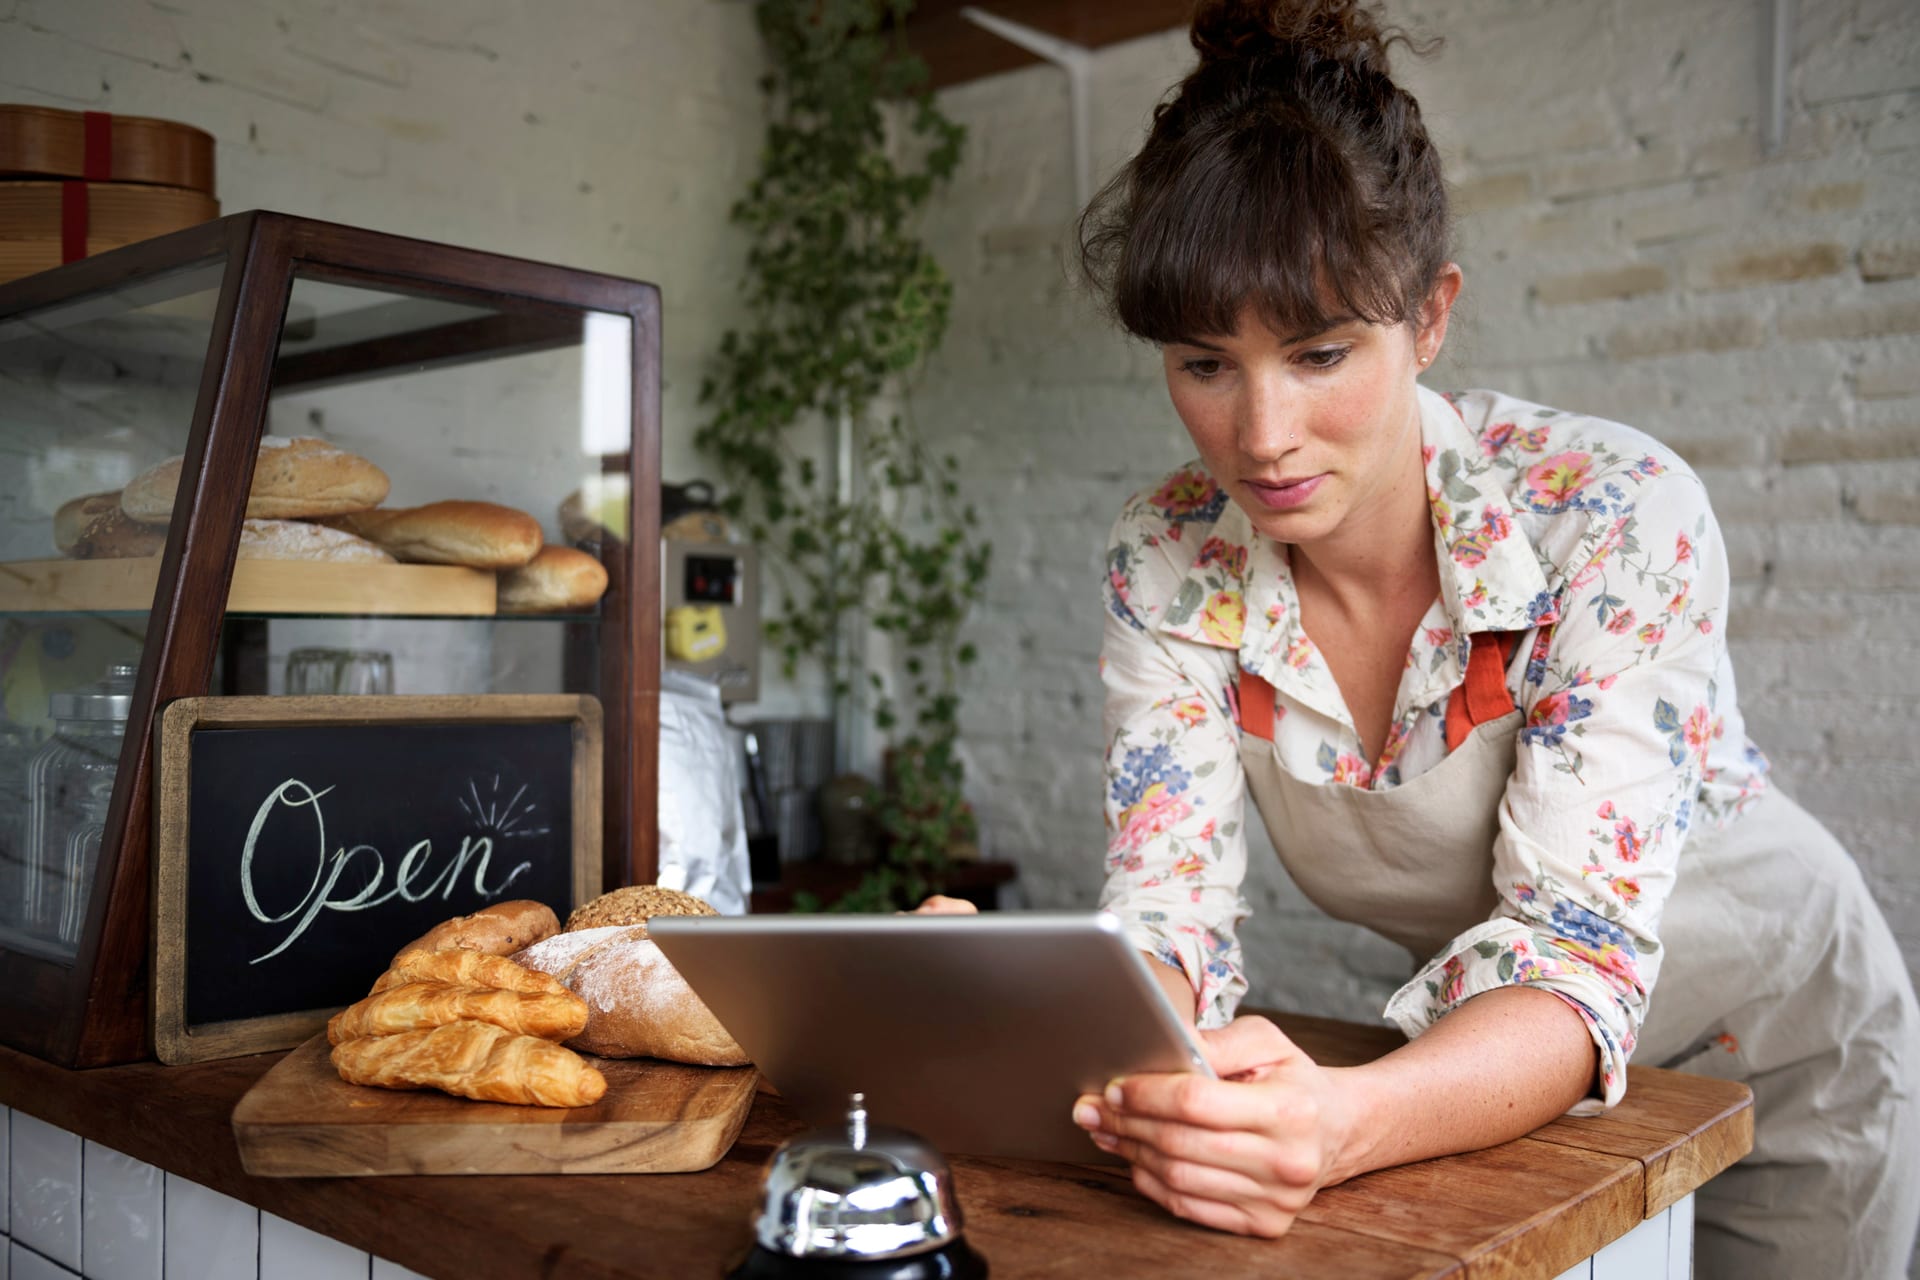 Any savvy small business owner should embrace digital marketing.